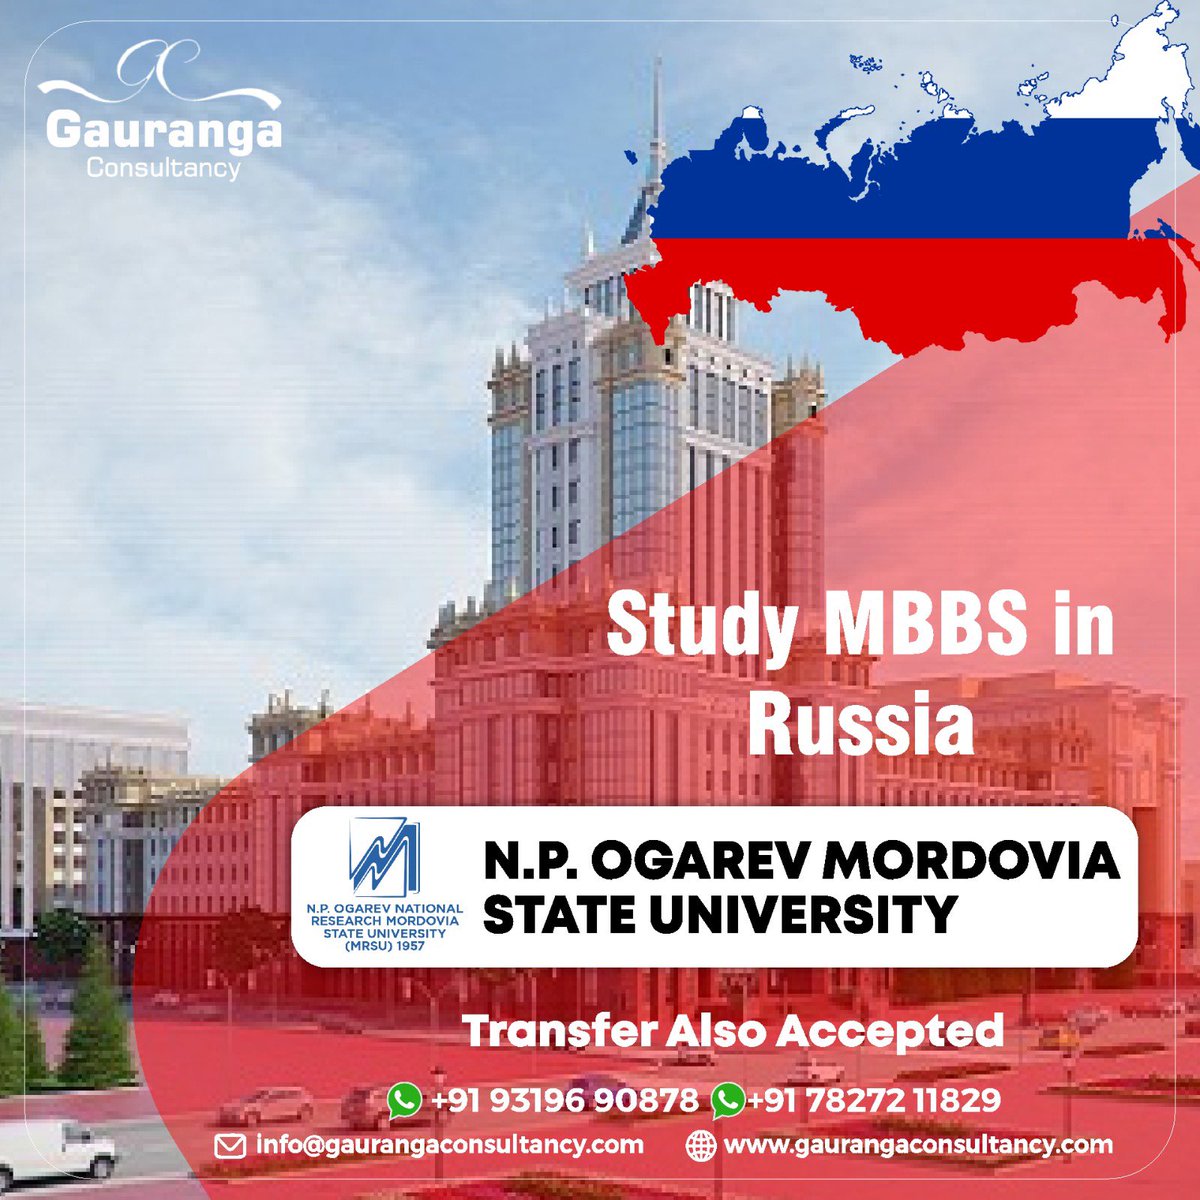 Studying MBBS abroad from Russia is a great opportunity to explore a new culture and gain access to first-class medical education.  #russiambbs #mbbsinrussia #mbbsfromrussia #mbbsadmissioninrussia #mbbsabroadinrussia